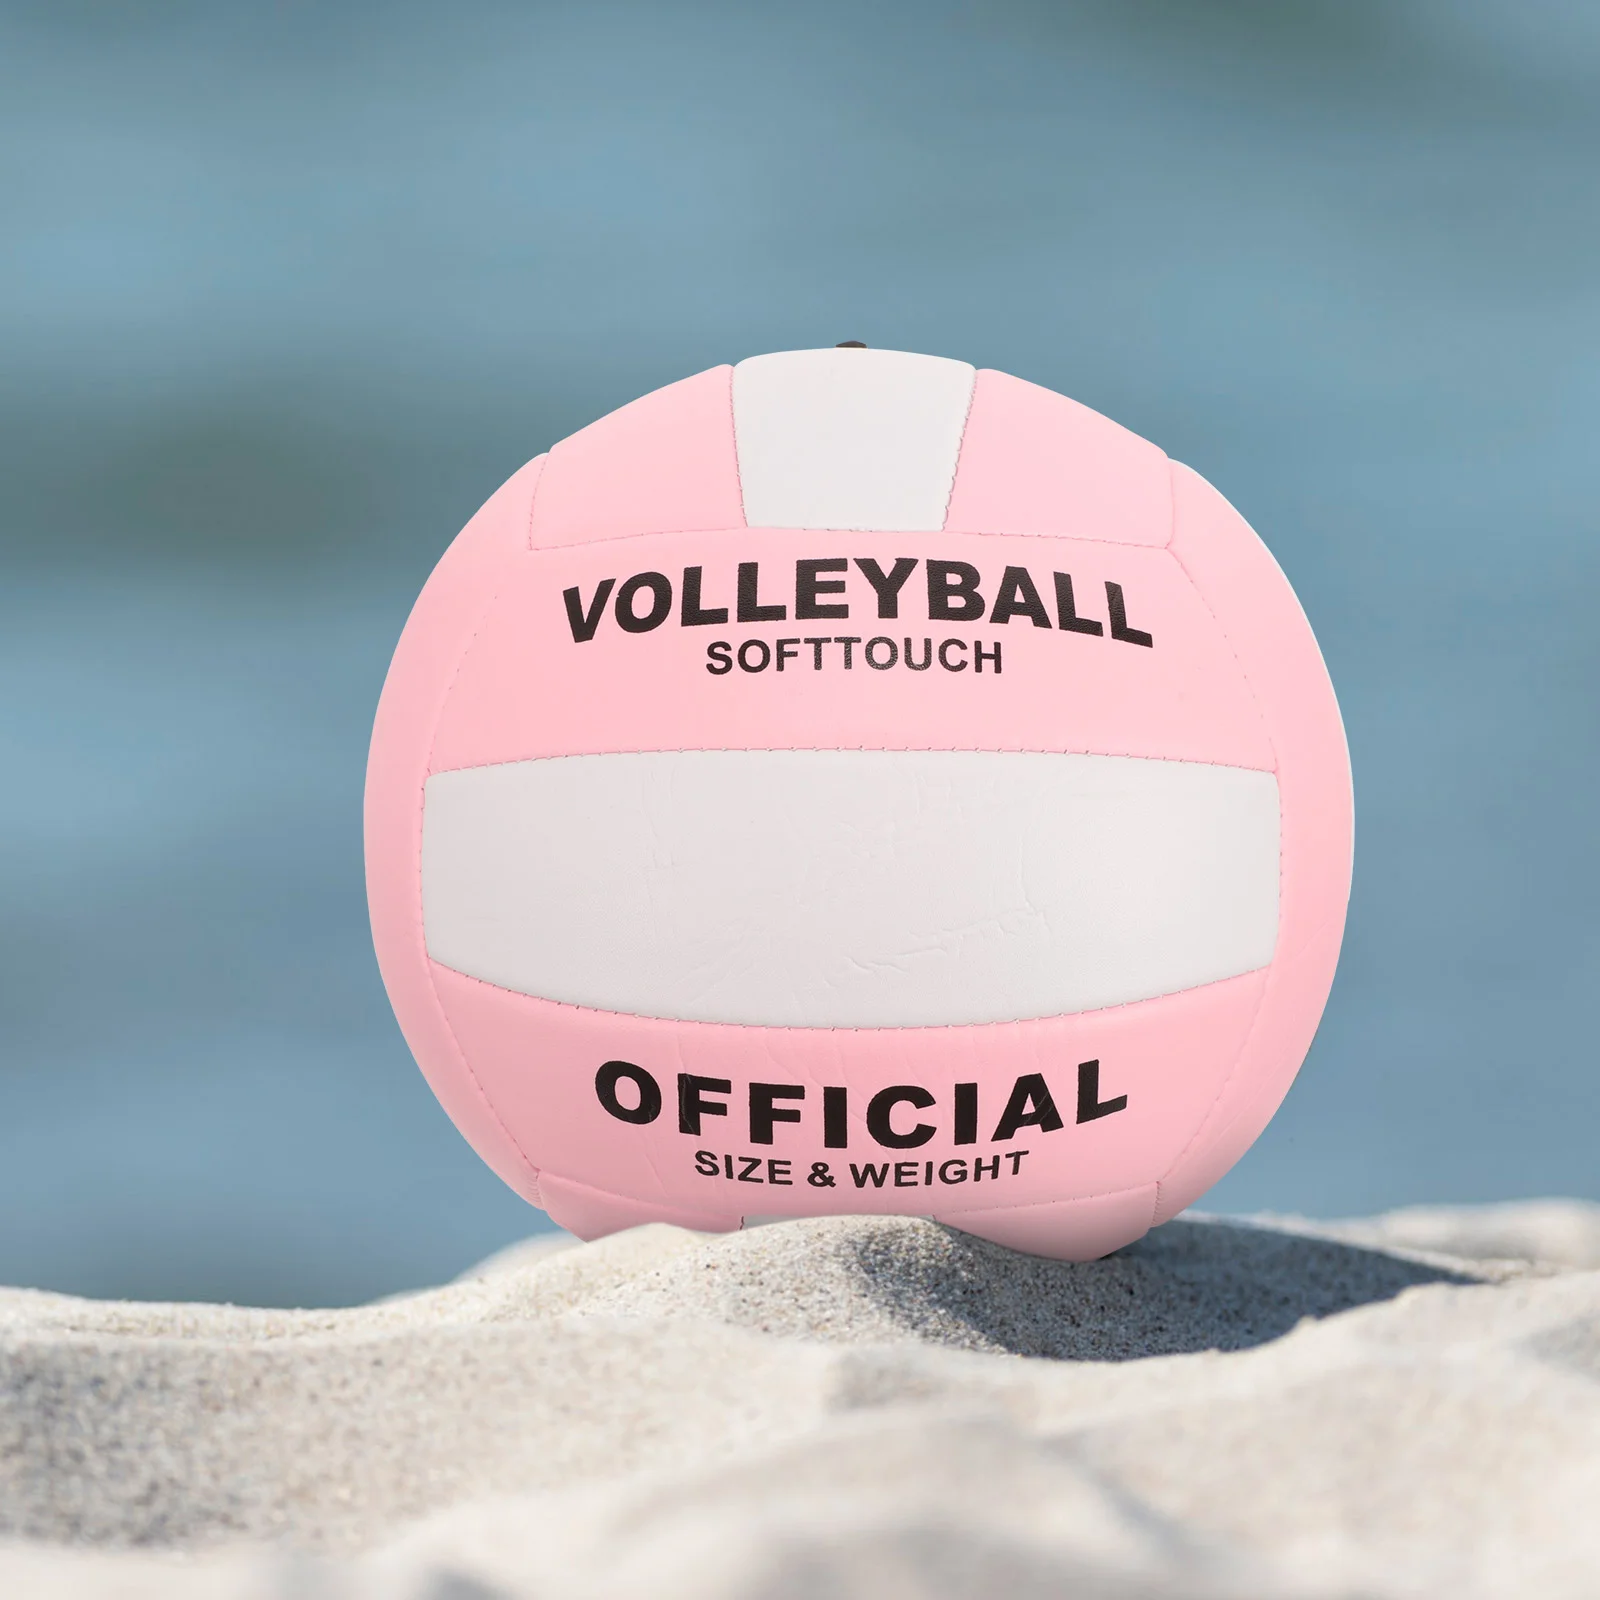 Volleyball Entrance Examination Official Size Size 5 Pu Official Size Soft Indoor Official Size